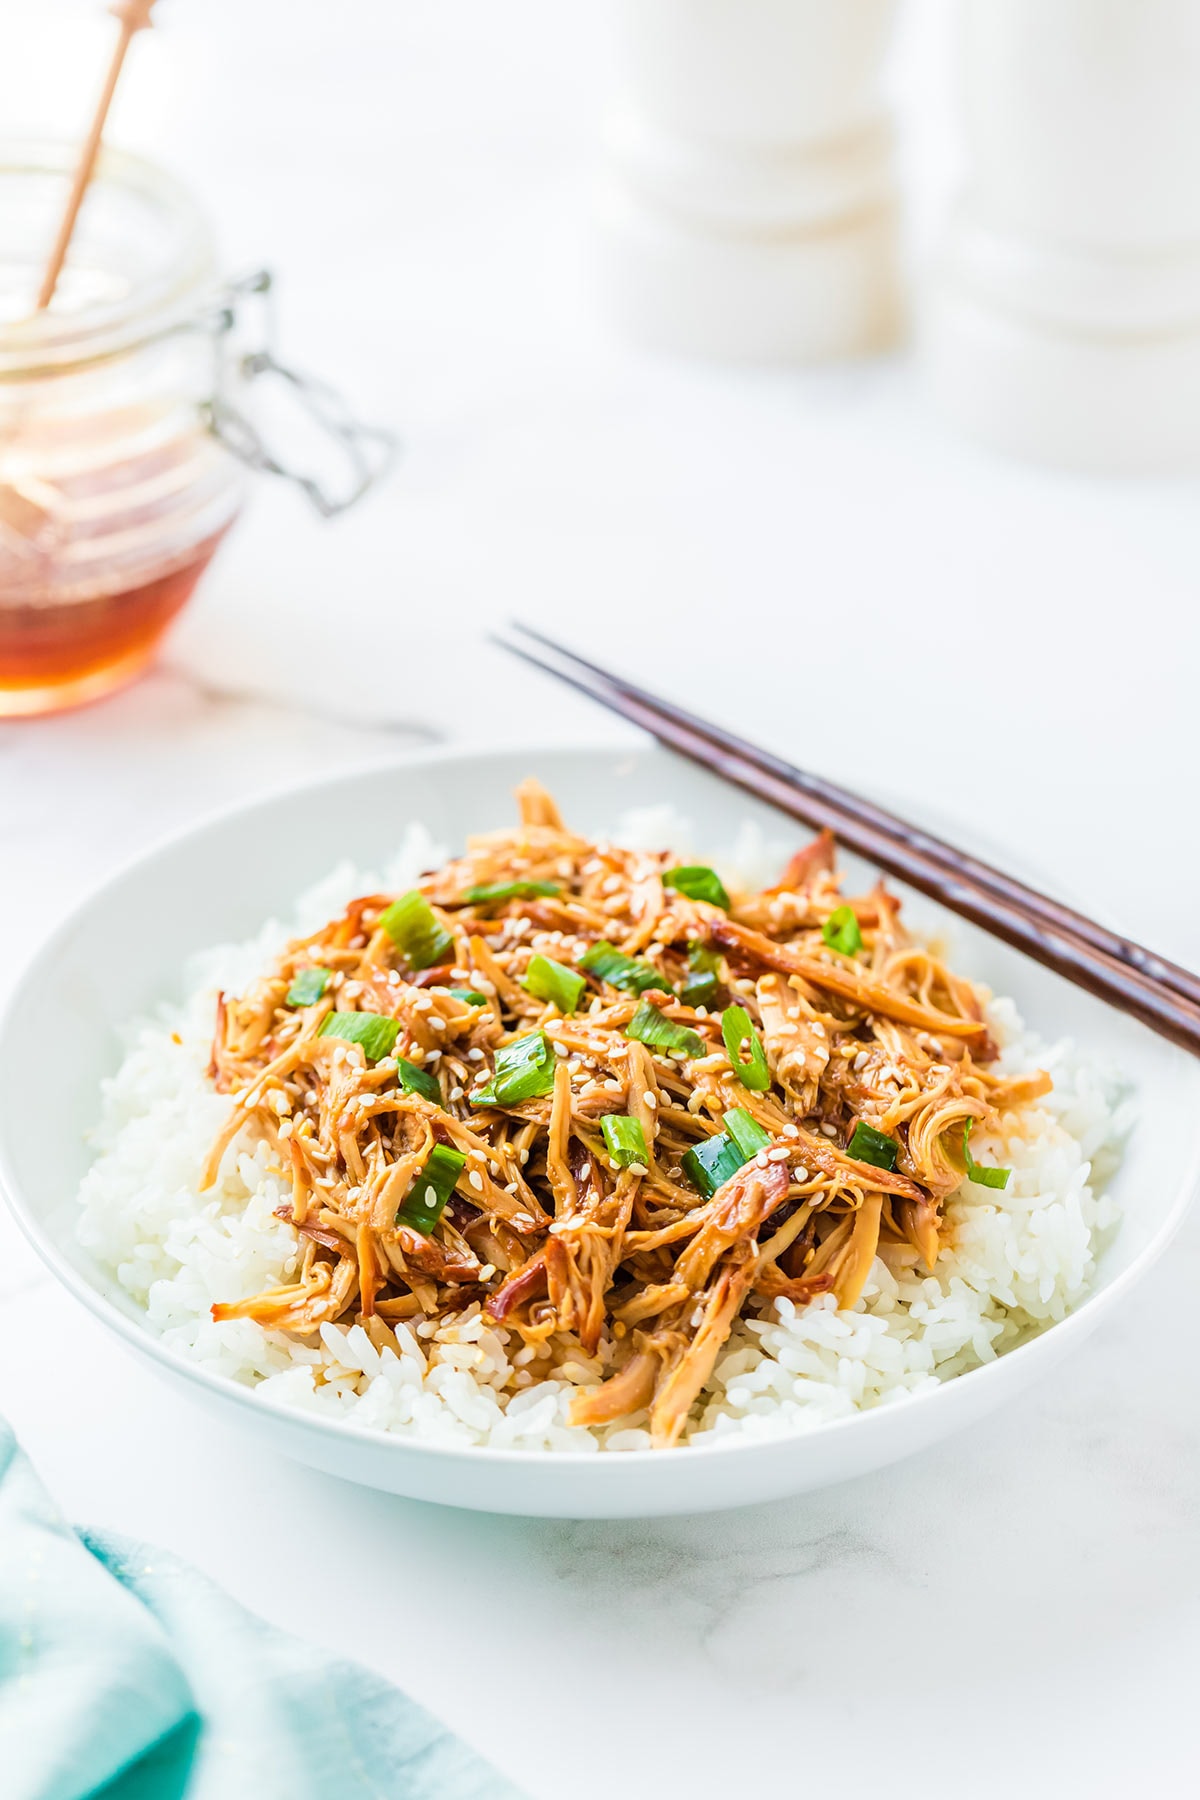 5-Ingredient Freezer Meal - Honey Sesame Chicken served on a plate